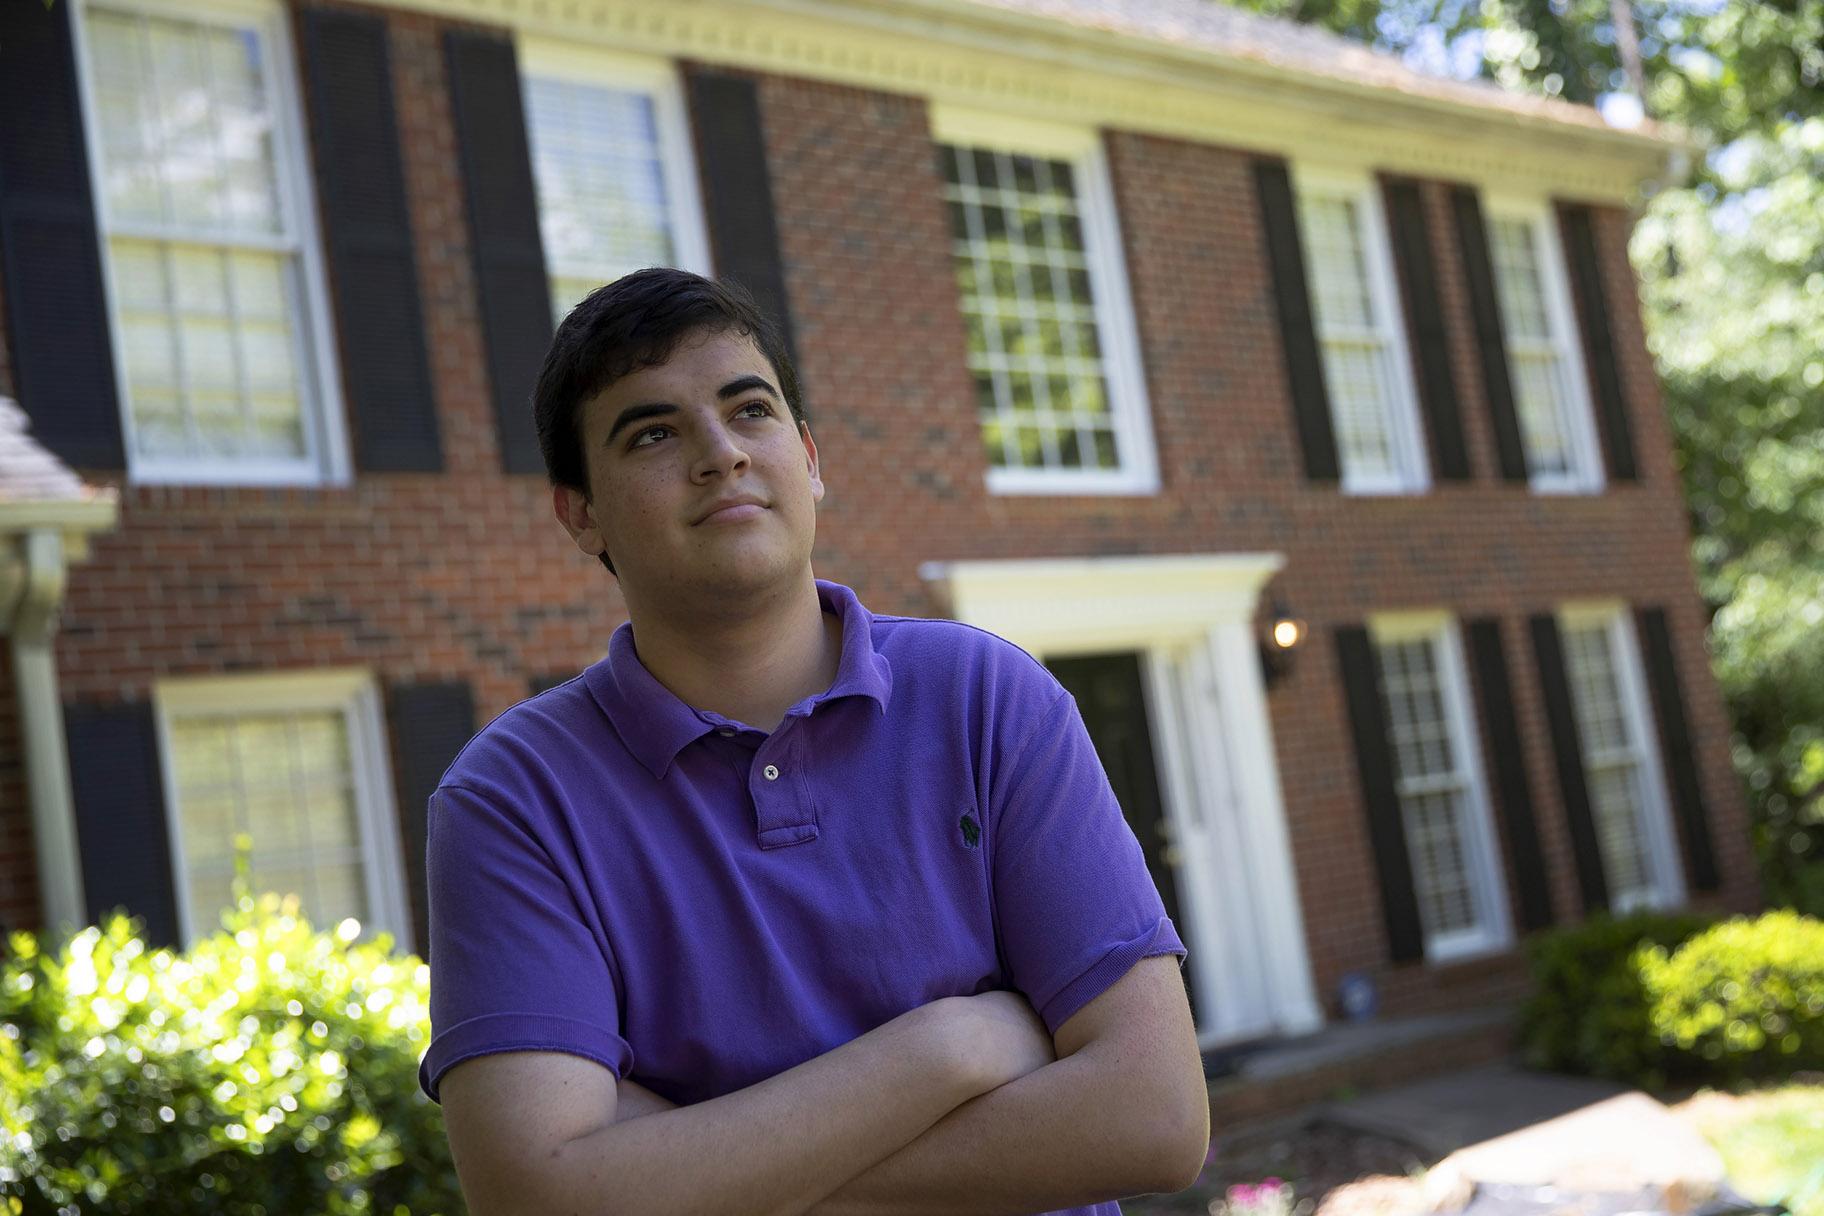 College student Jake Mershon poses in front of his parents home Thursday, May 7, 2020, in Roswell Ga. (AP Photo / John Bazemore)